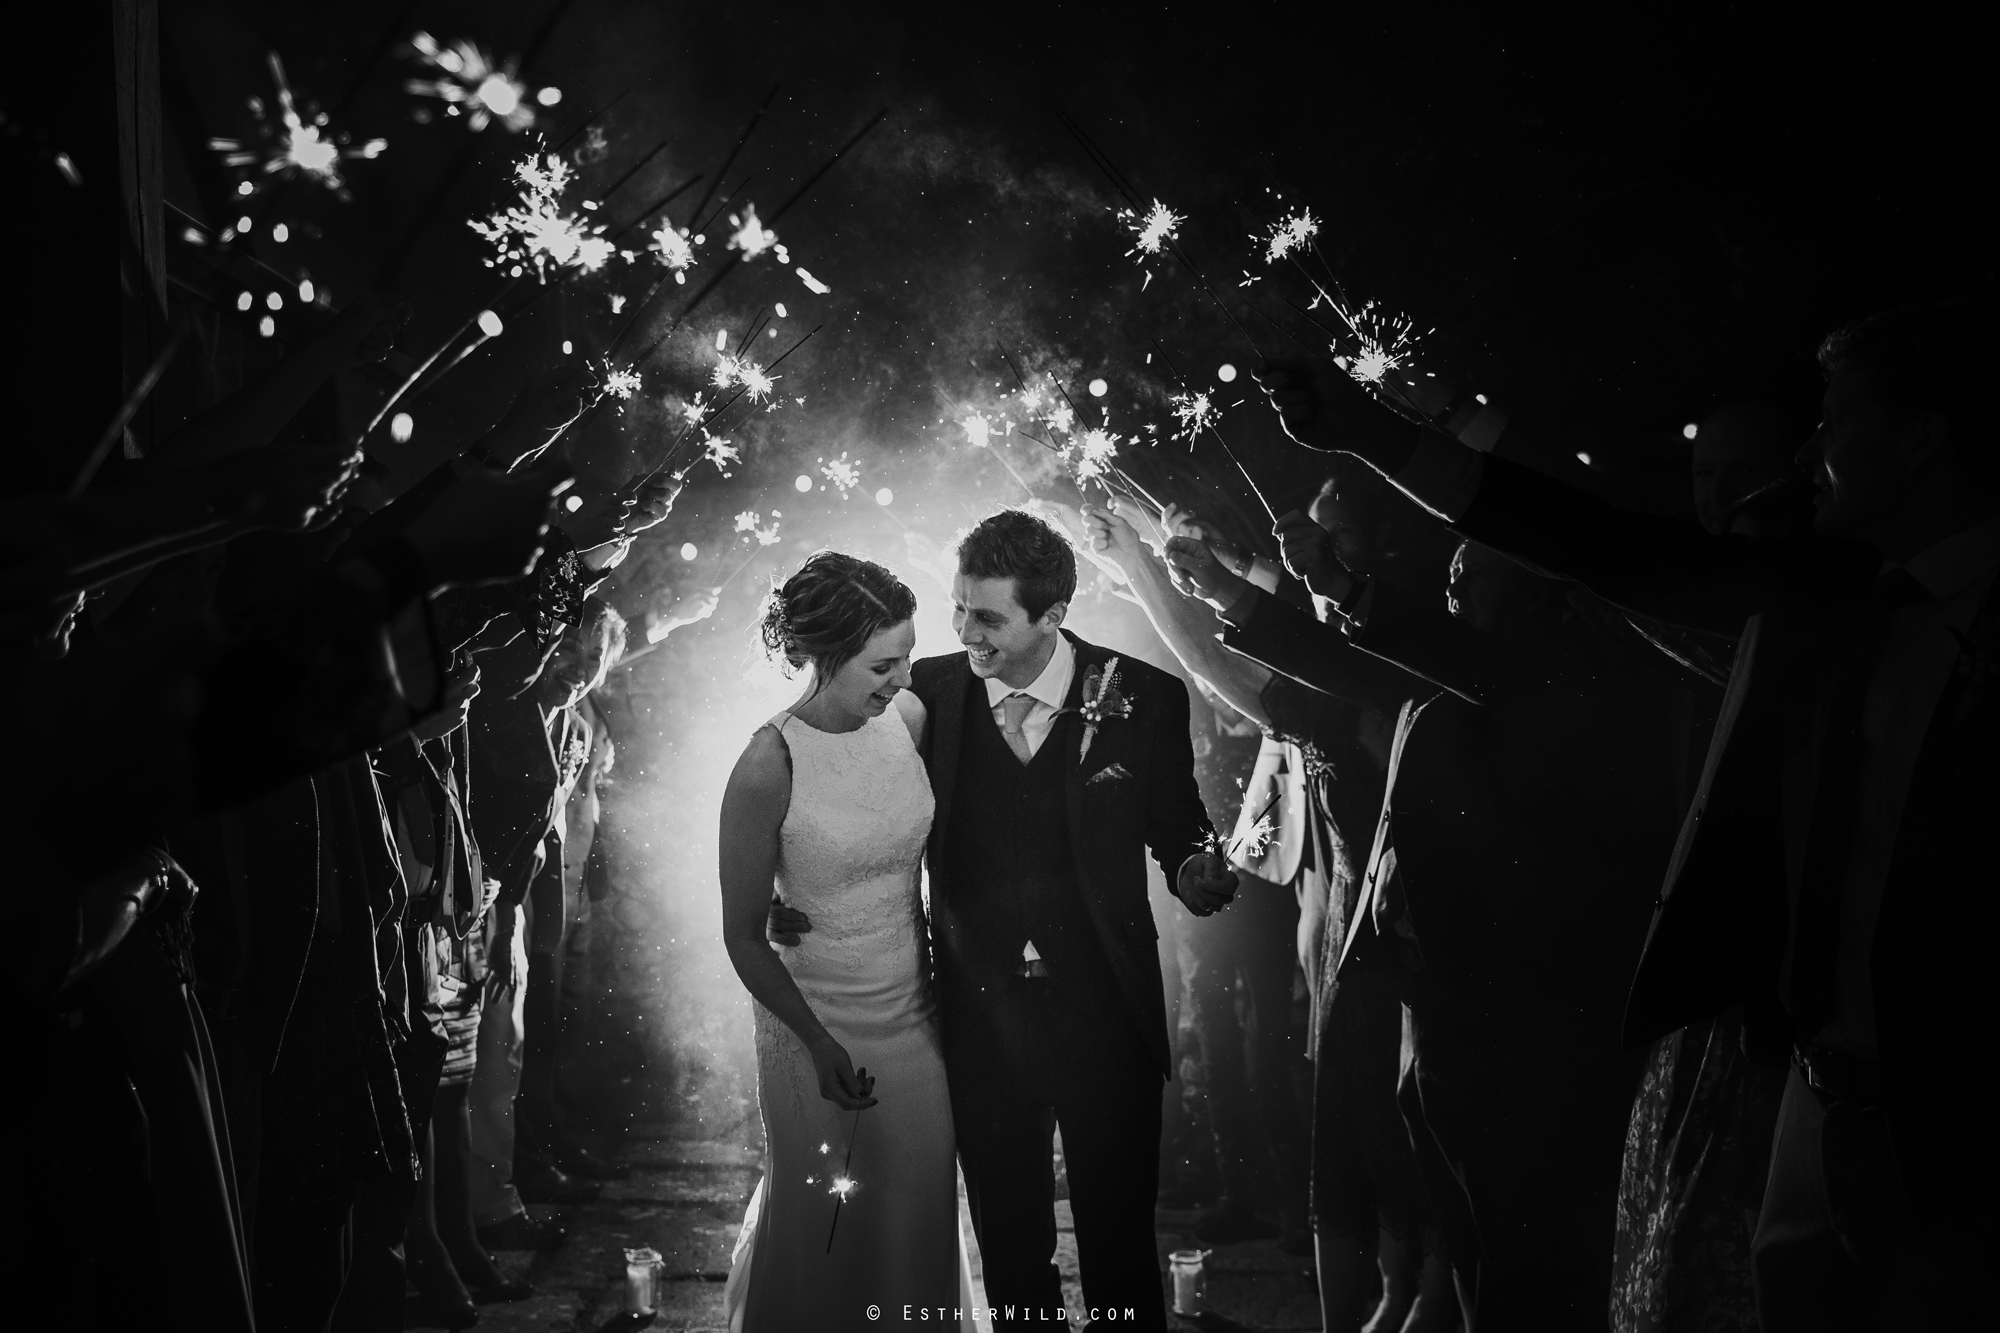  "We hired Esther to photograph our wedding back in November at Chaucer Barn in Gresham. We planned our day in around 3 months, after finding Esther through her amazing website, the short timescale was no problem to her at all and her communication w